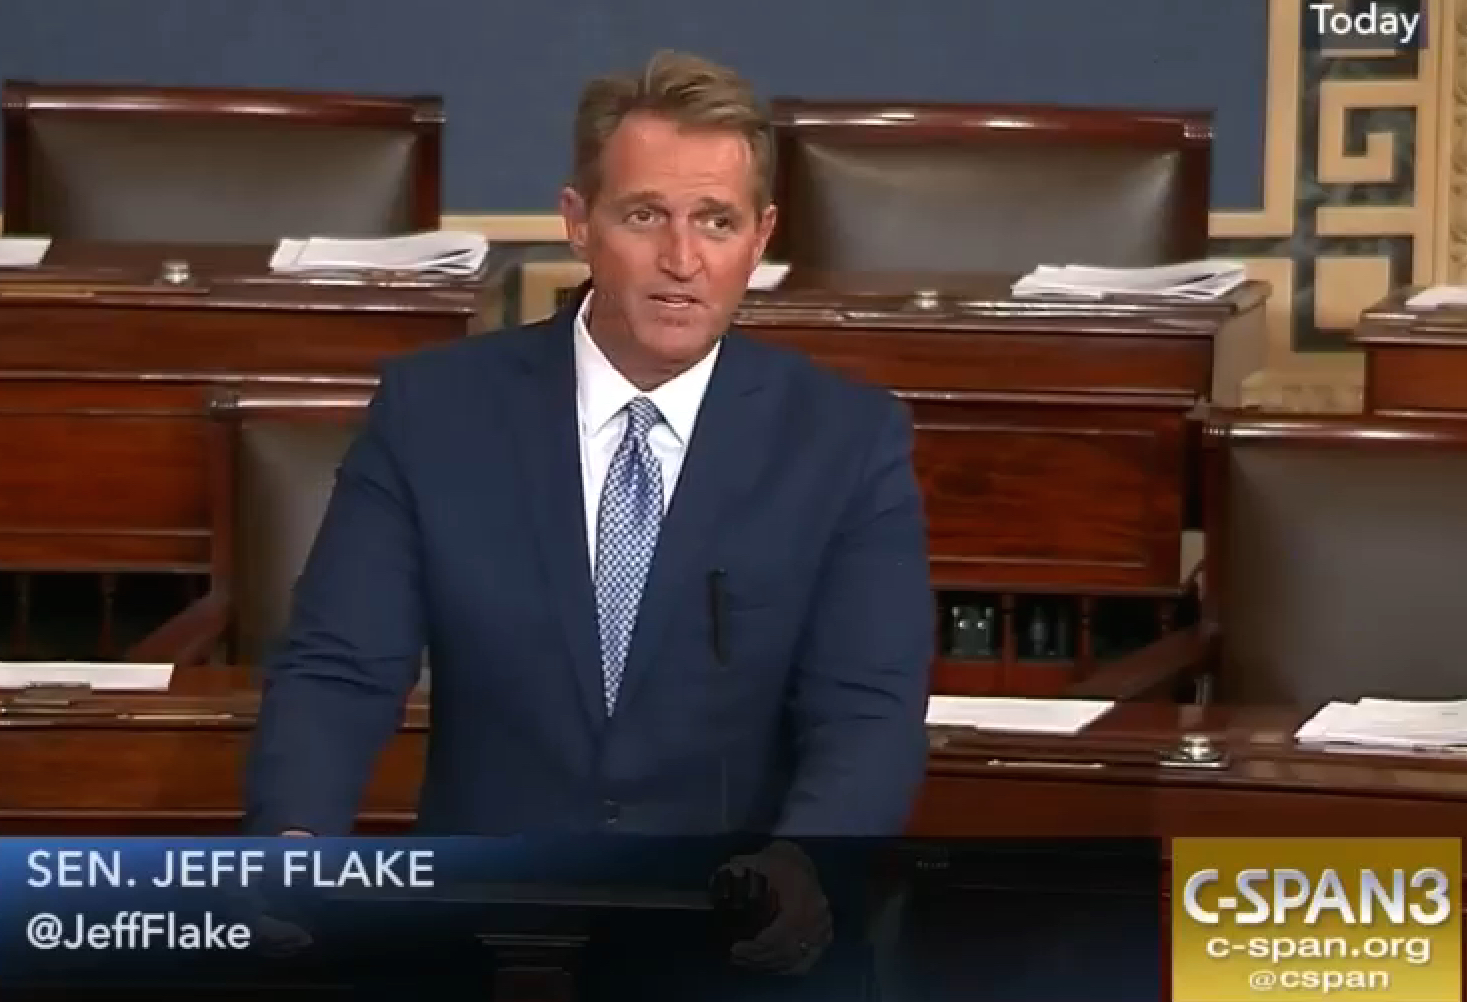 U.S. Sen. Jeff Flake, R-Ariz., called on his colleagues to stand up to Donald Trump on Oct. 24, 2017. (C-SPAN)